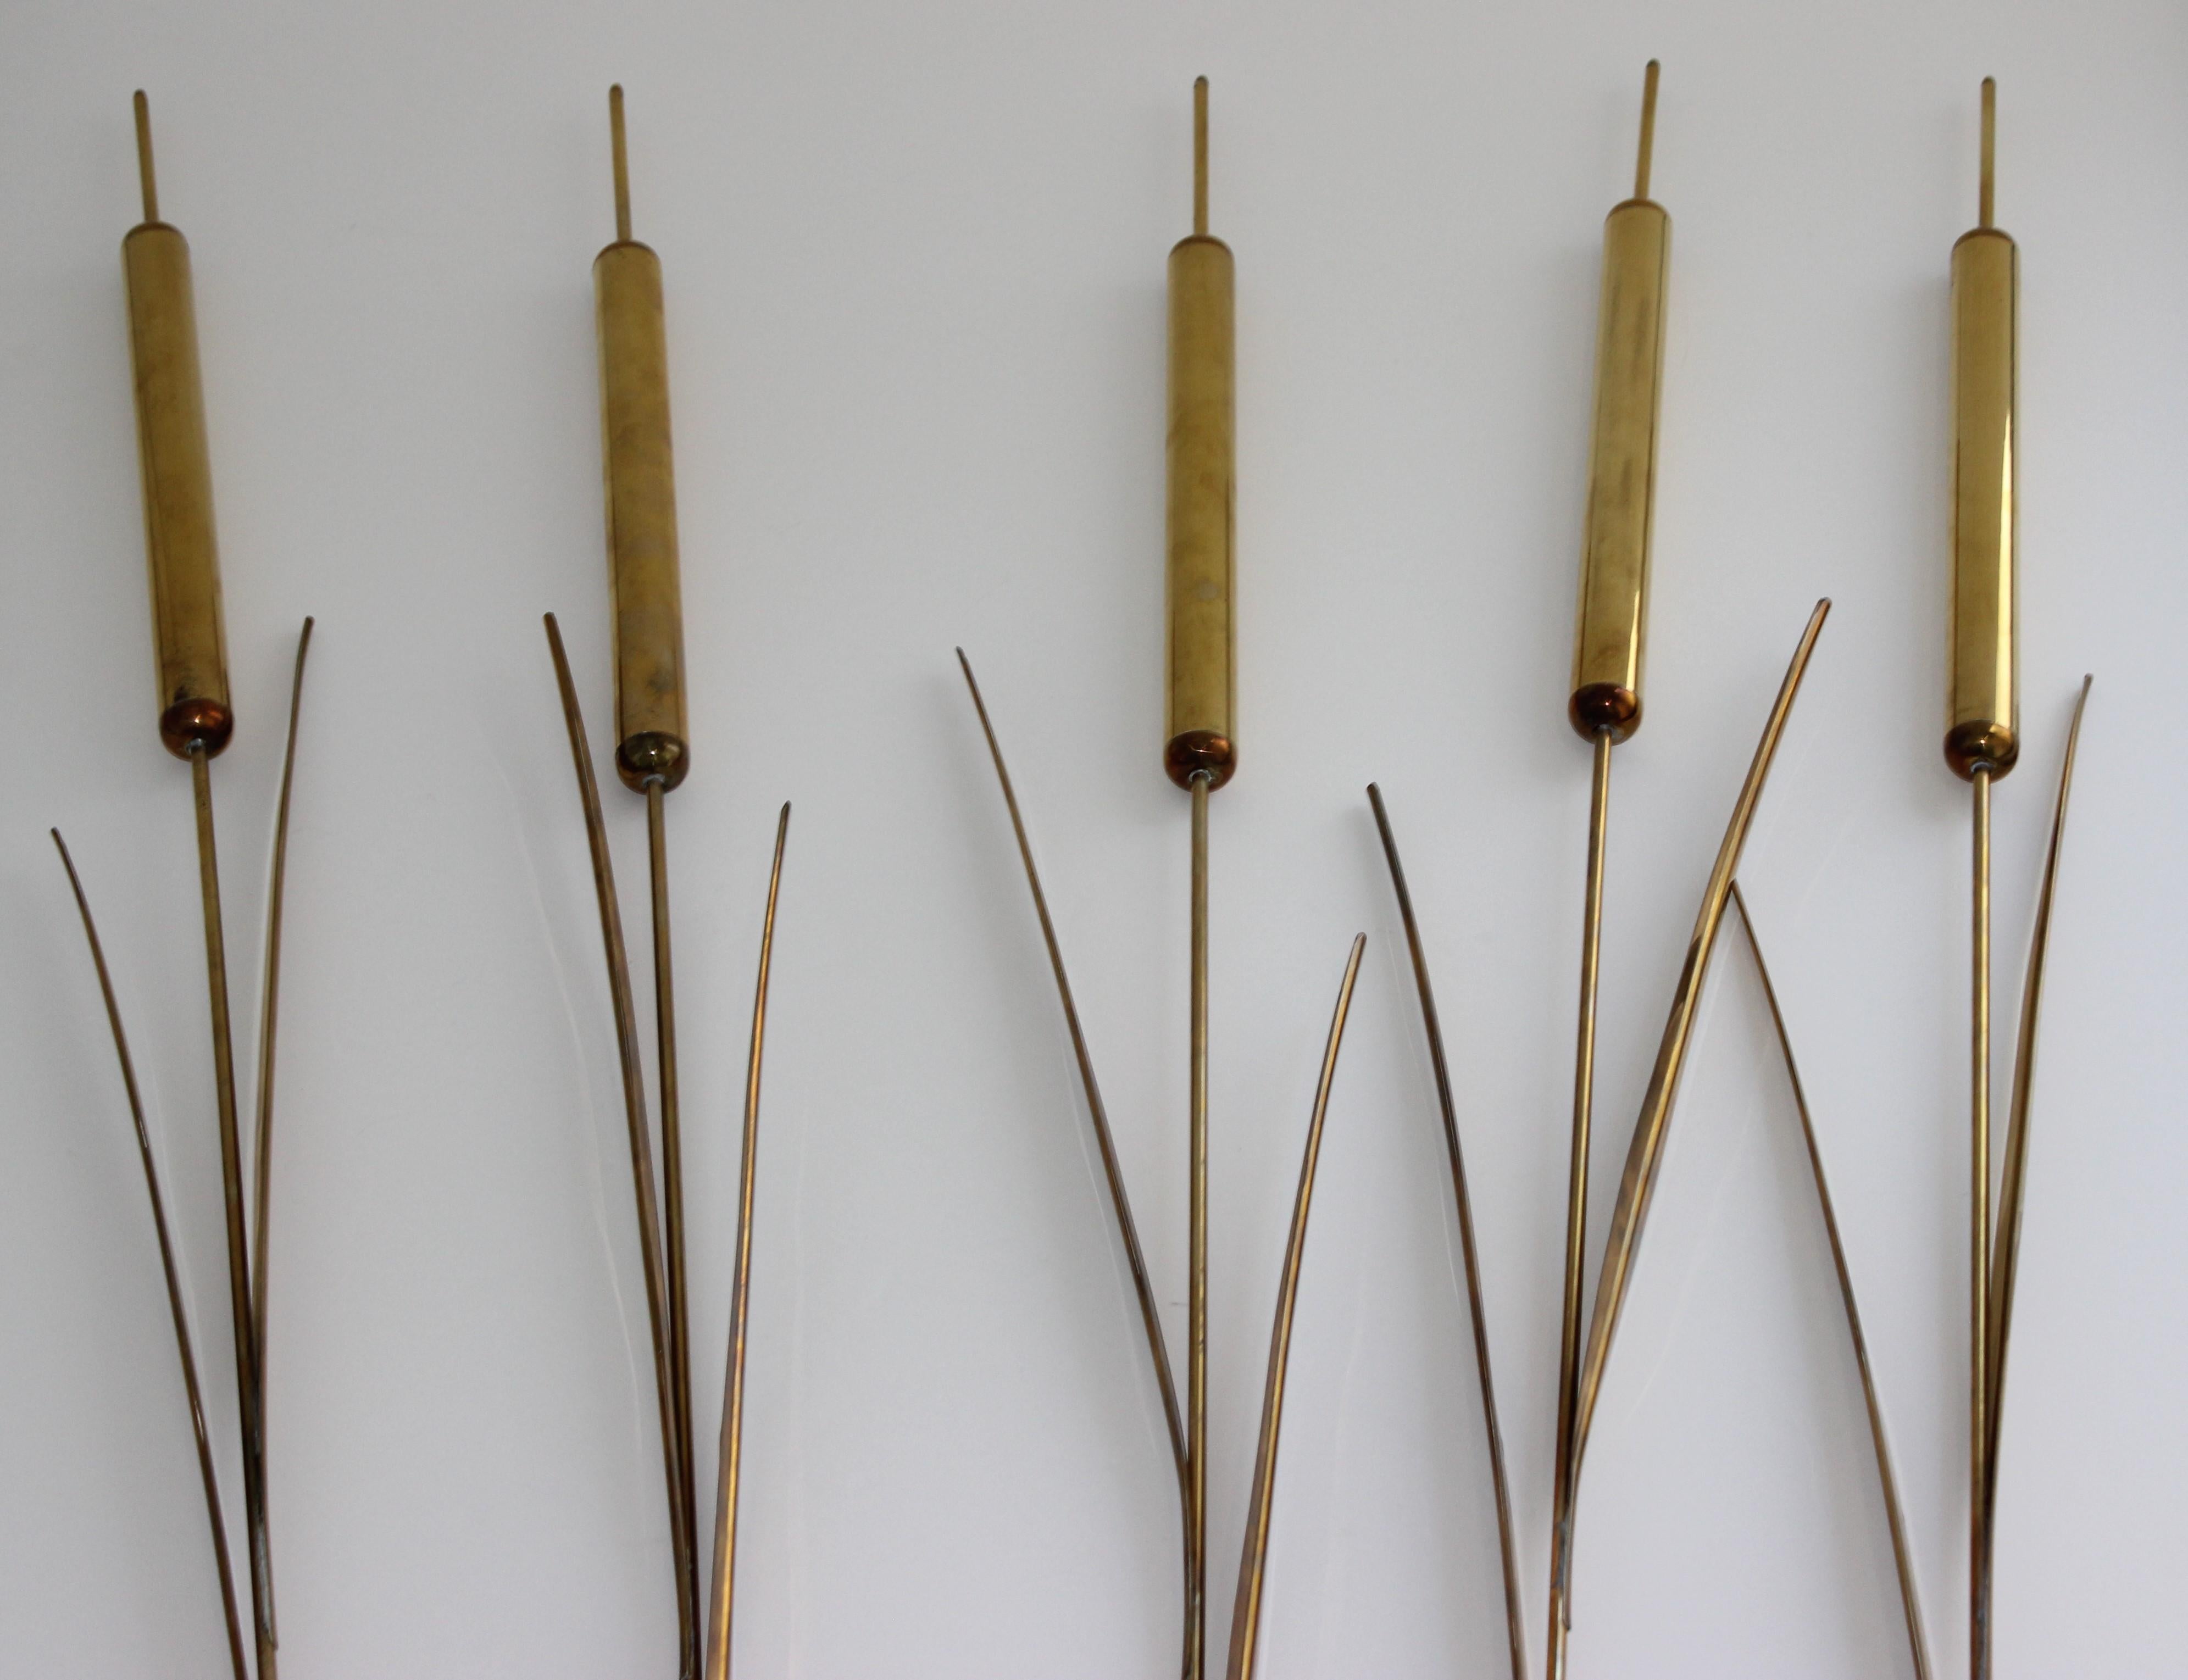 Remarkable set of 5 larger-than-life cattails by Curtis Jere at Artisan House California in the 1970s
See last picture for one way to display these.